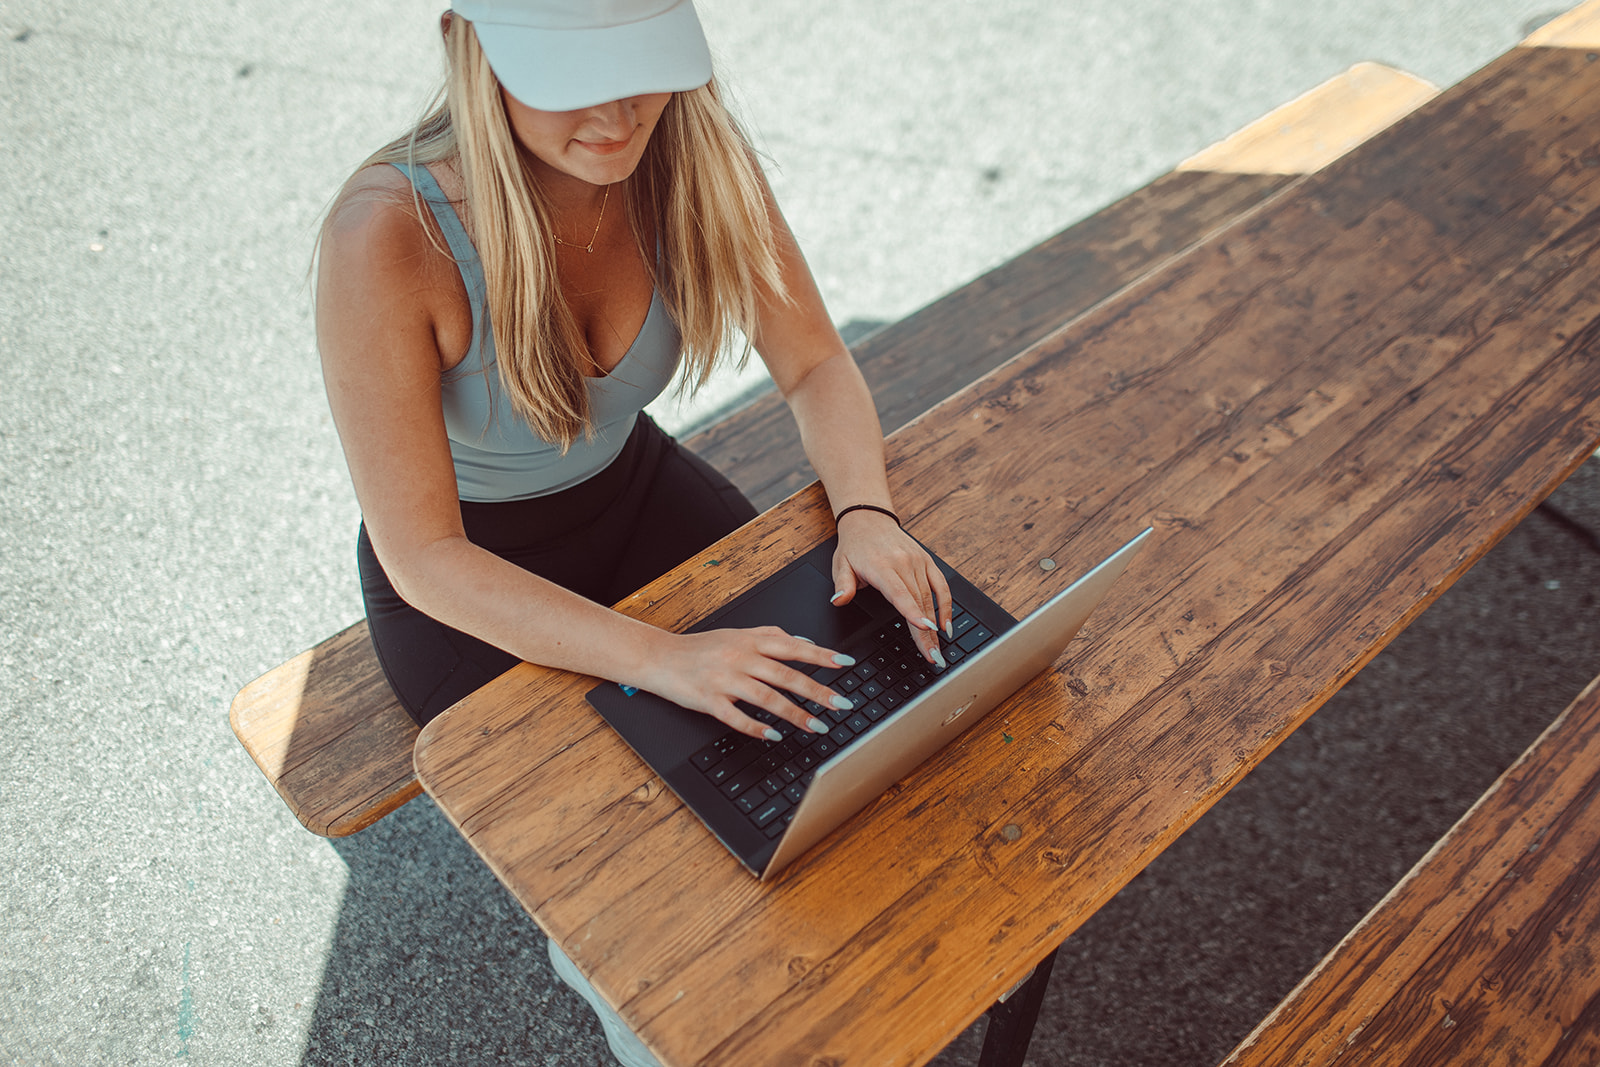 Girl working on laptop at picnic table.